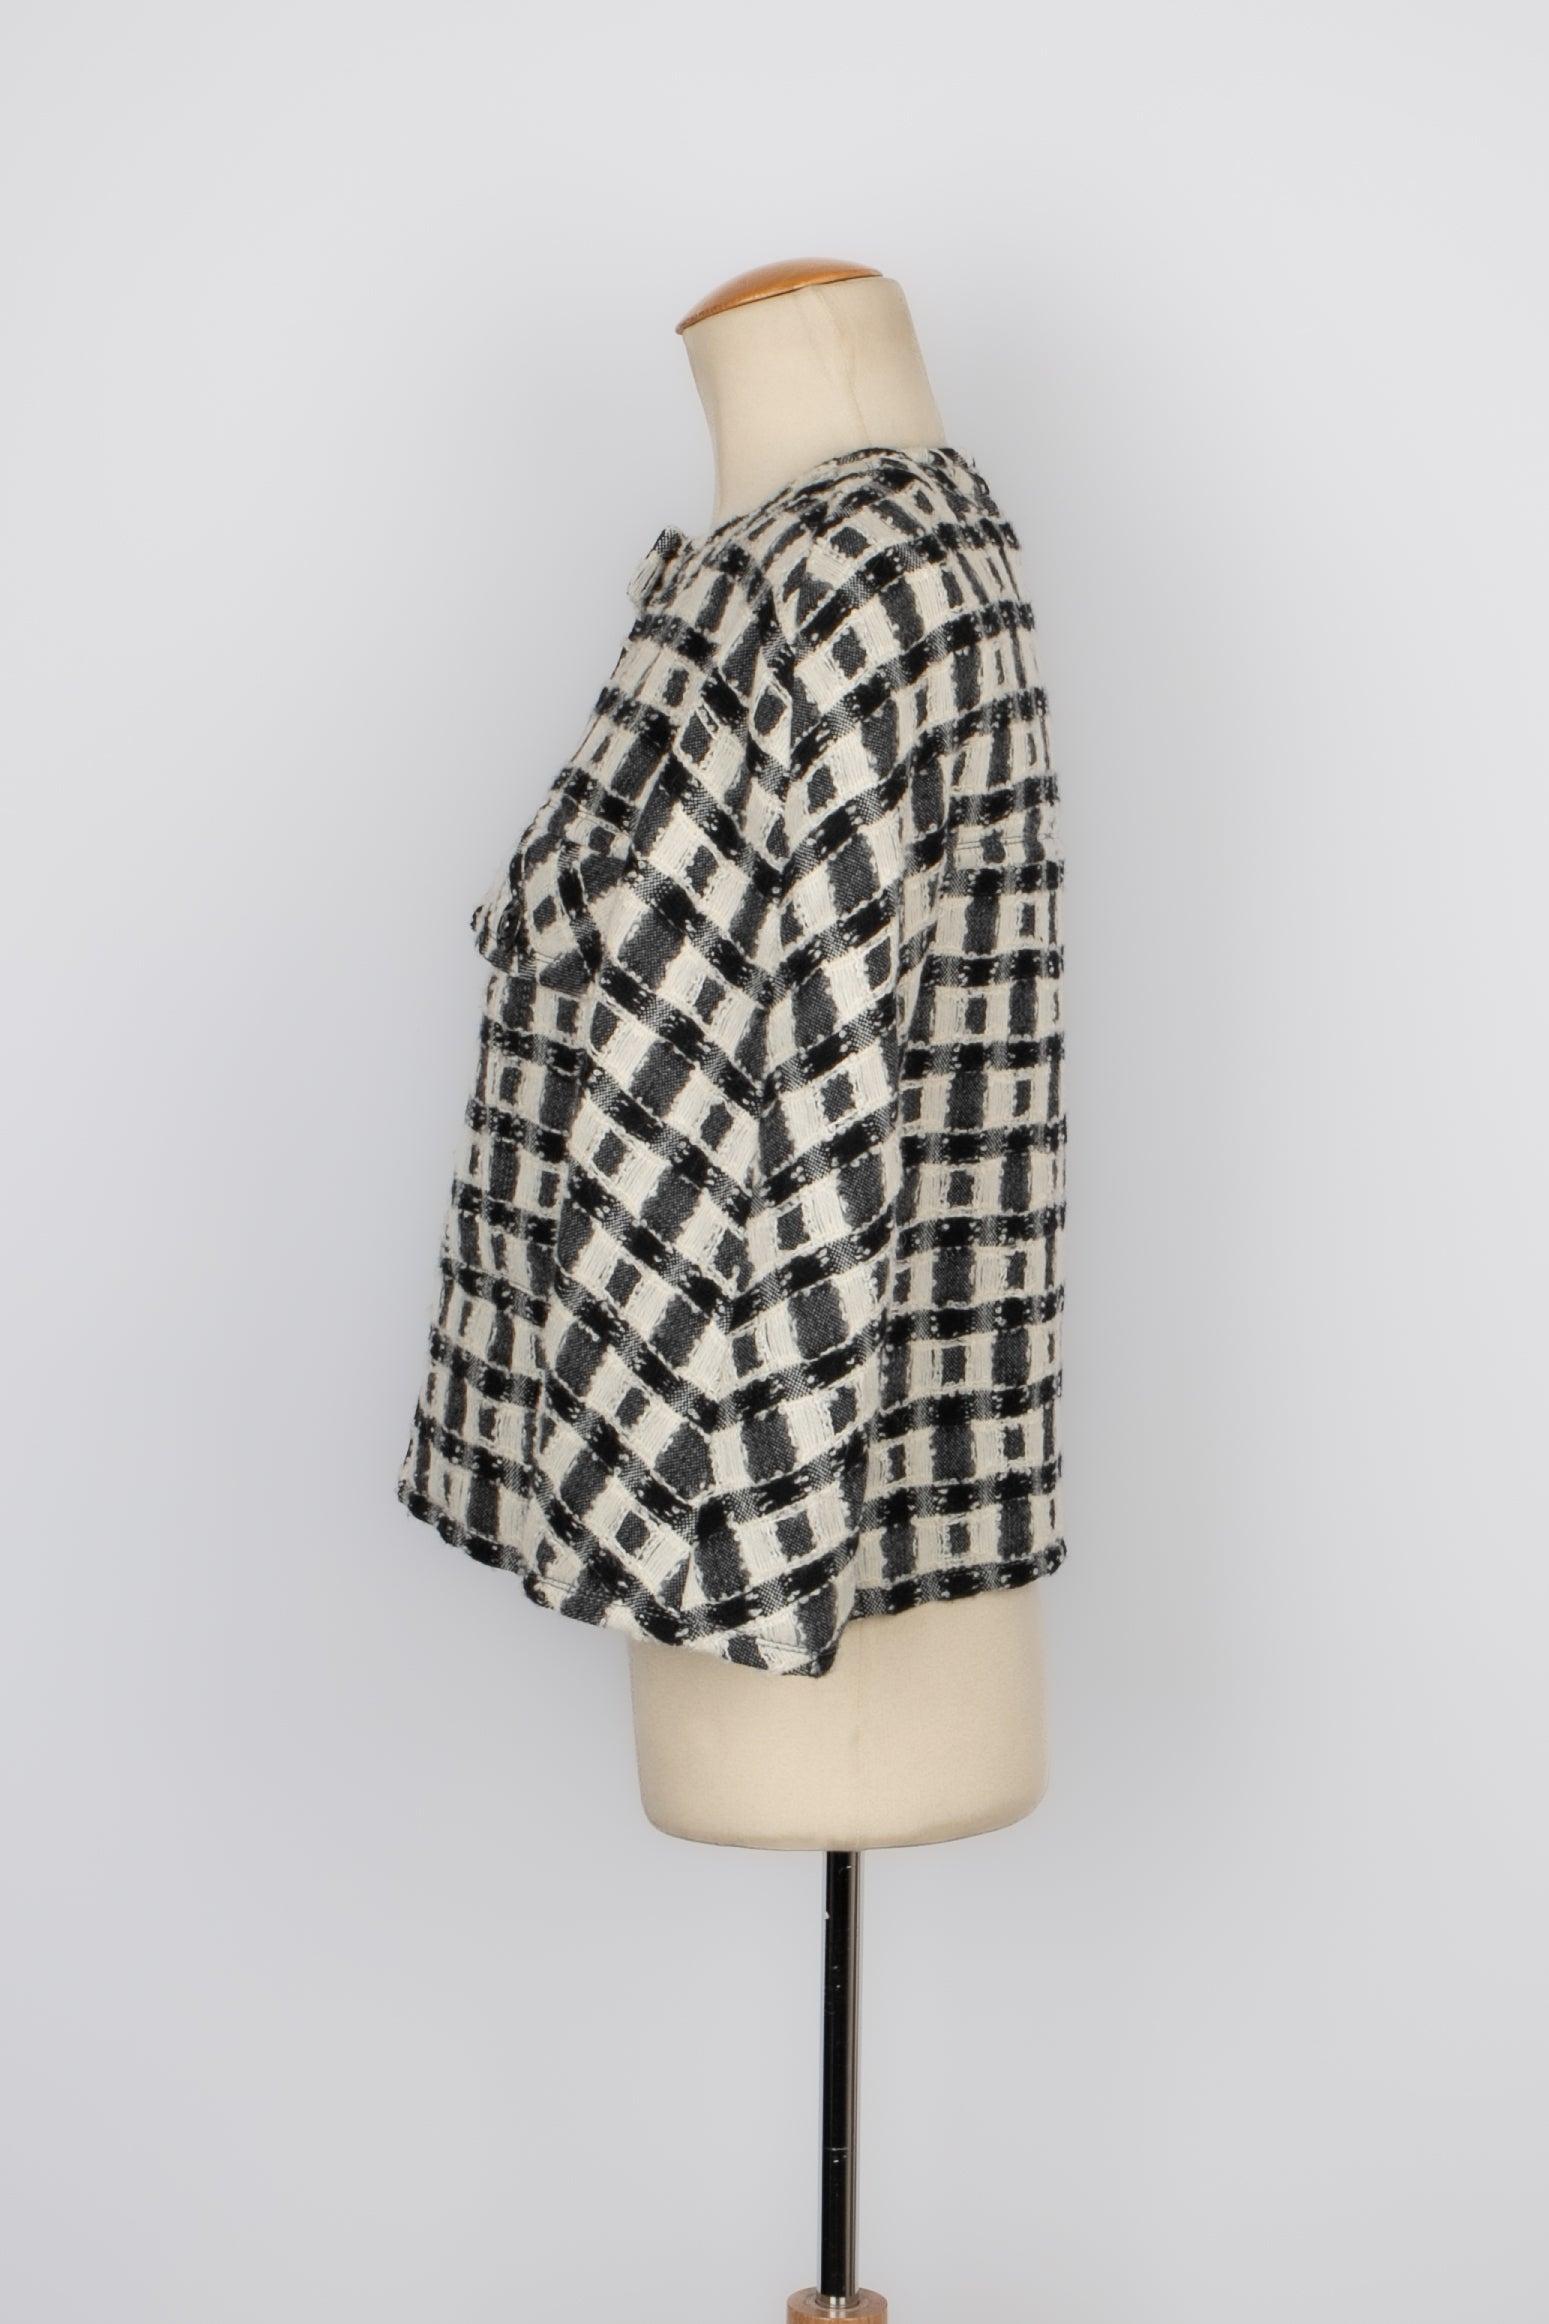 Women's Chanel Short Jacket in Black and White Tweed, Silk Lining